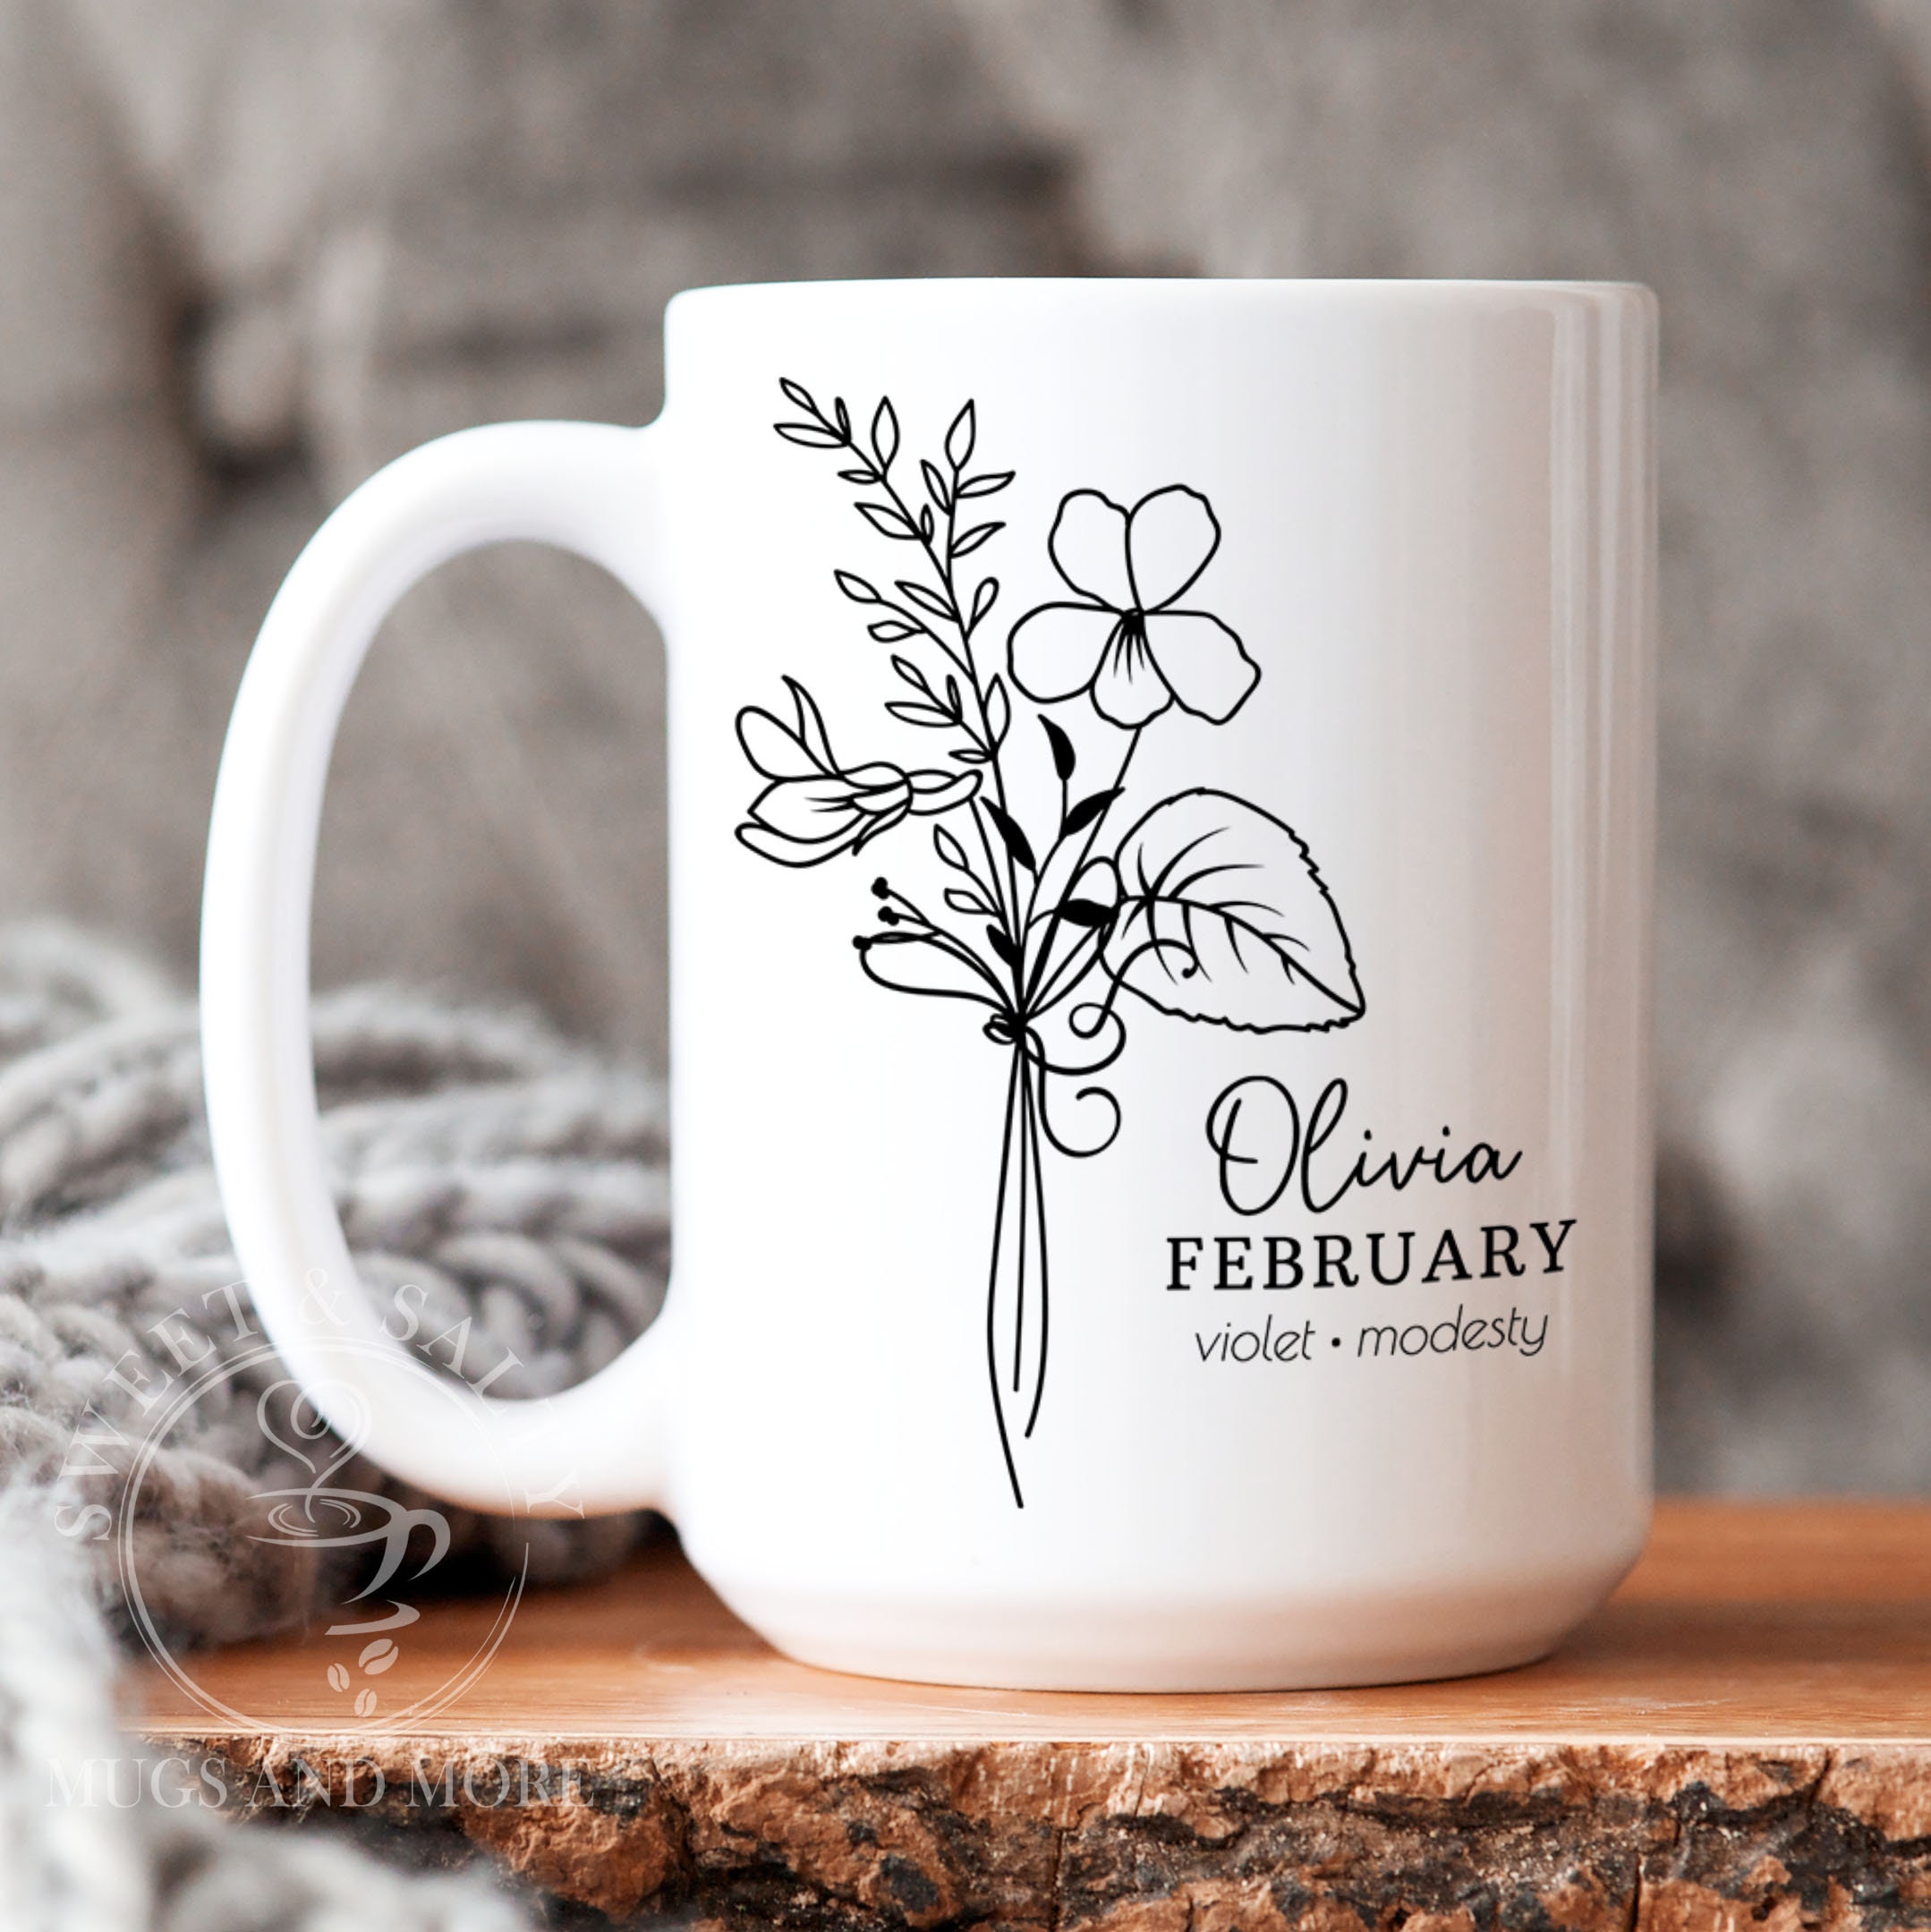 February Birthday Gift, Personalized Birth Flower Mug for Her Minimalist  Floral Mug for Aquarius or Pisces Born in February Bday Violet 